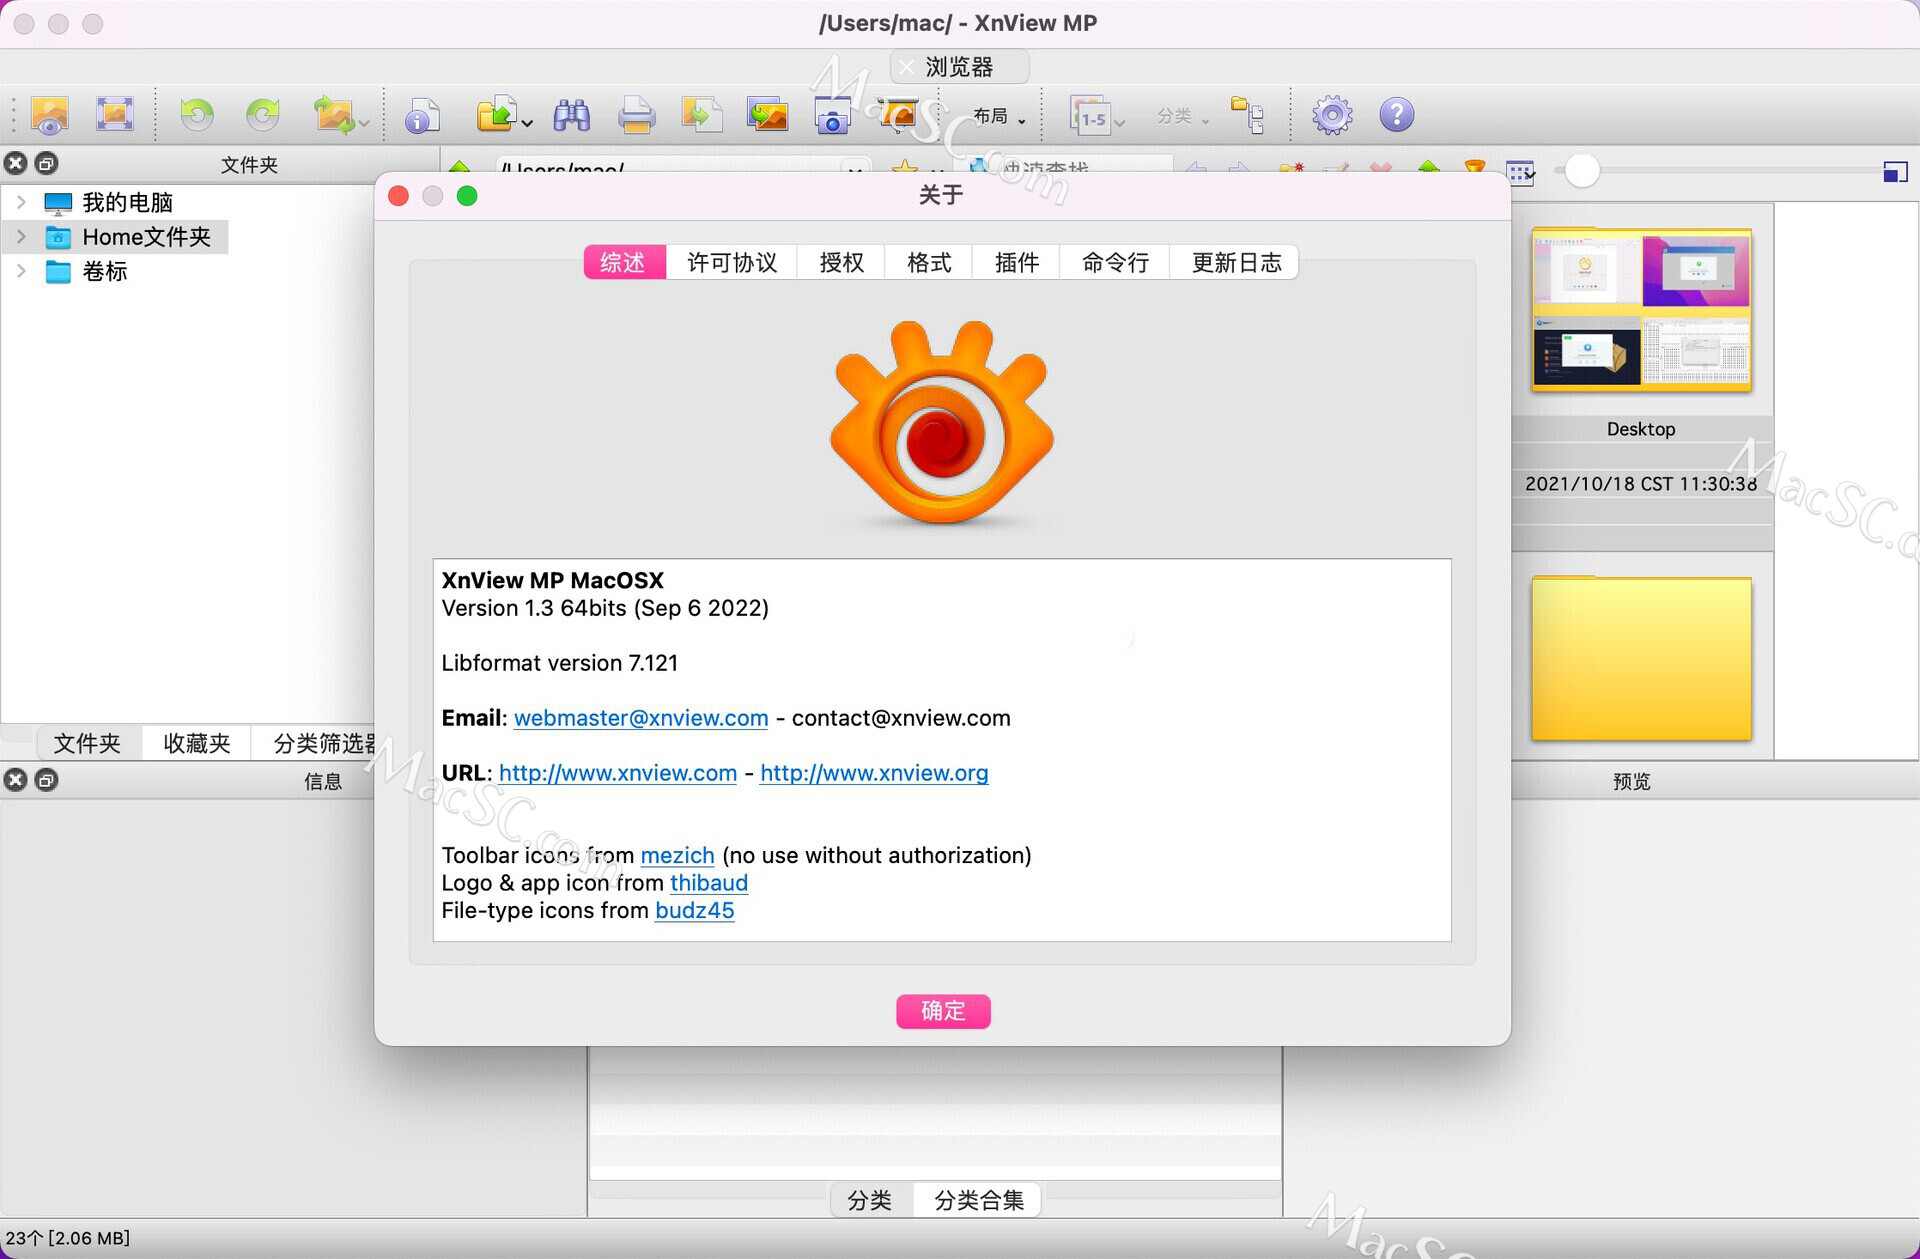 download the last version for apple XnViewMP 1.5.0